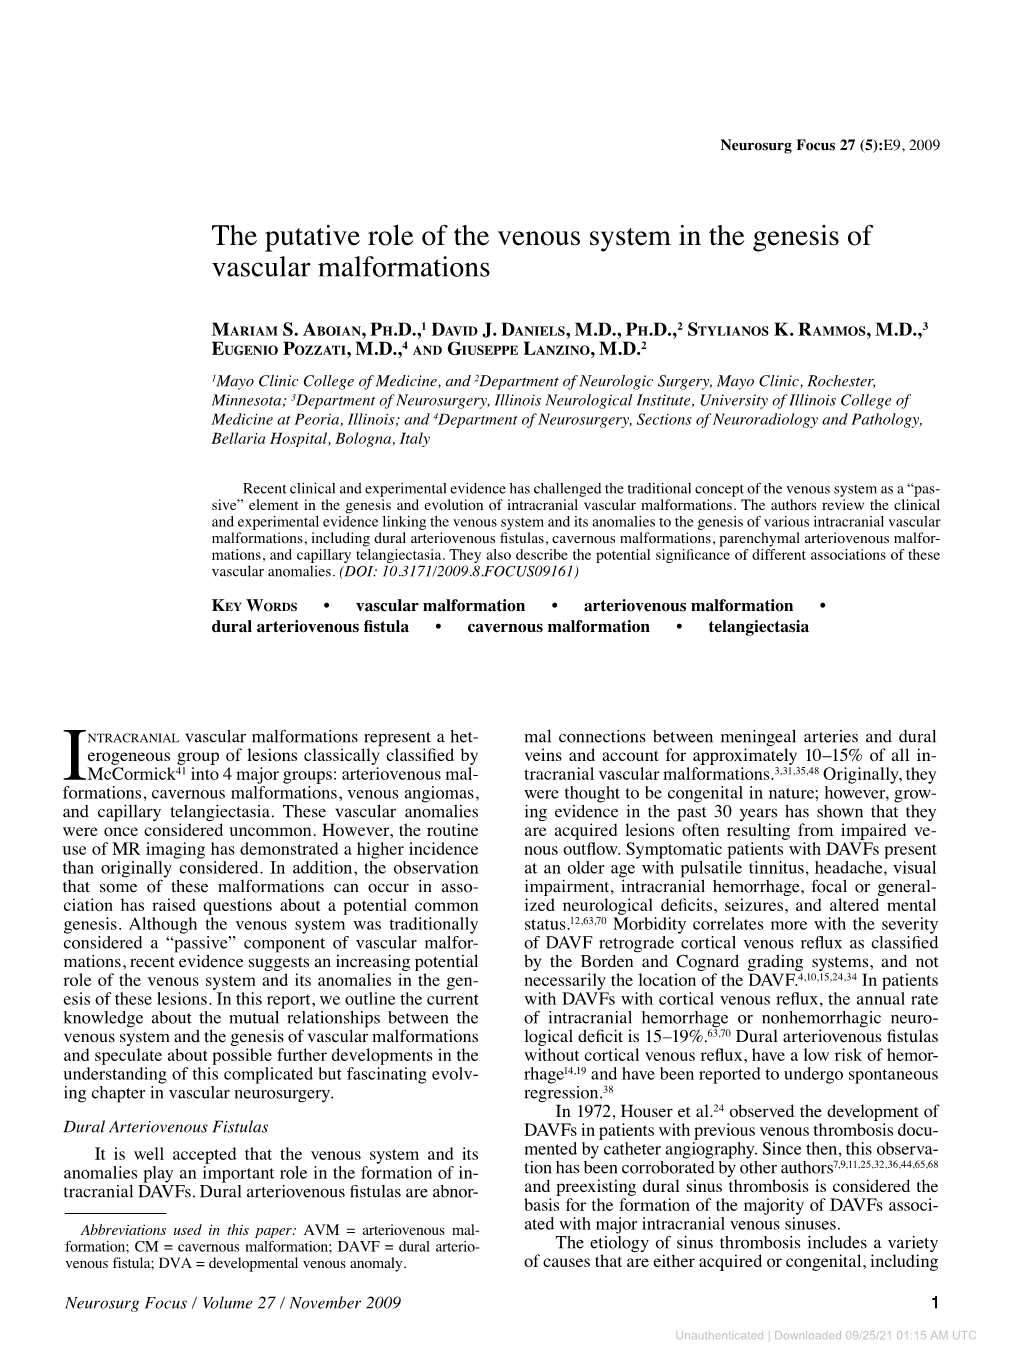 The Putative Role of the Venous System in the Genesis of Vascular Malformations